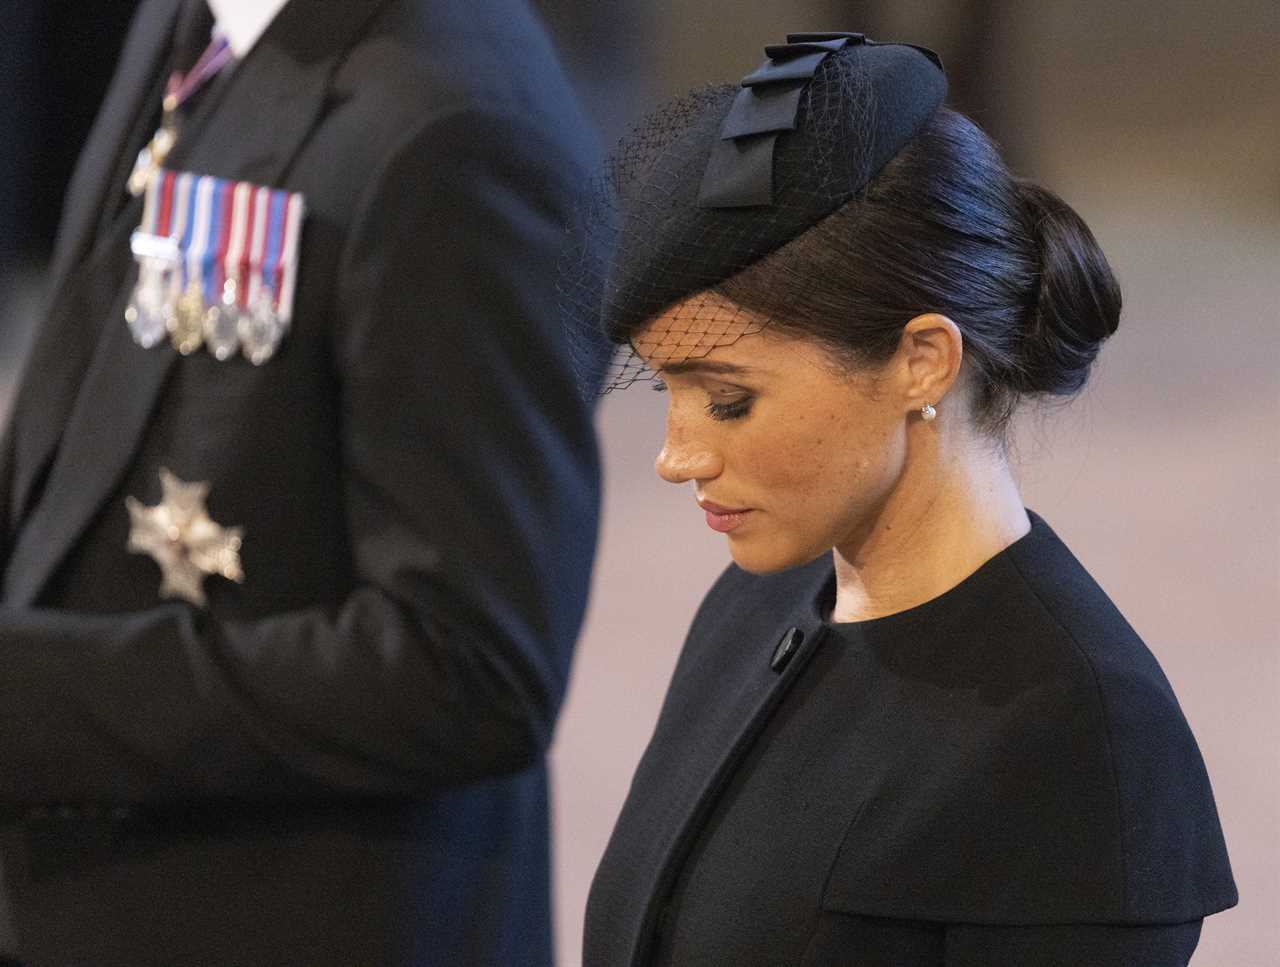 Meghan Markle makes a touching tribute to the Queen during the Westminster service as she follows royal tradition